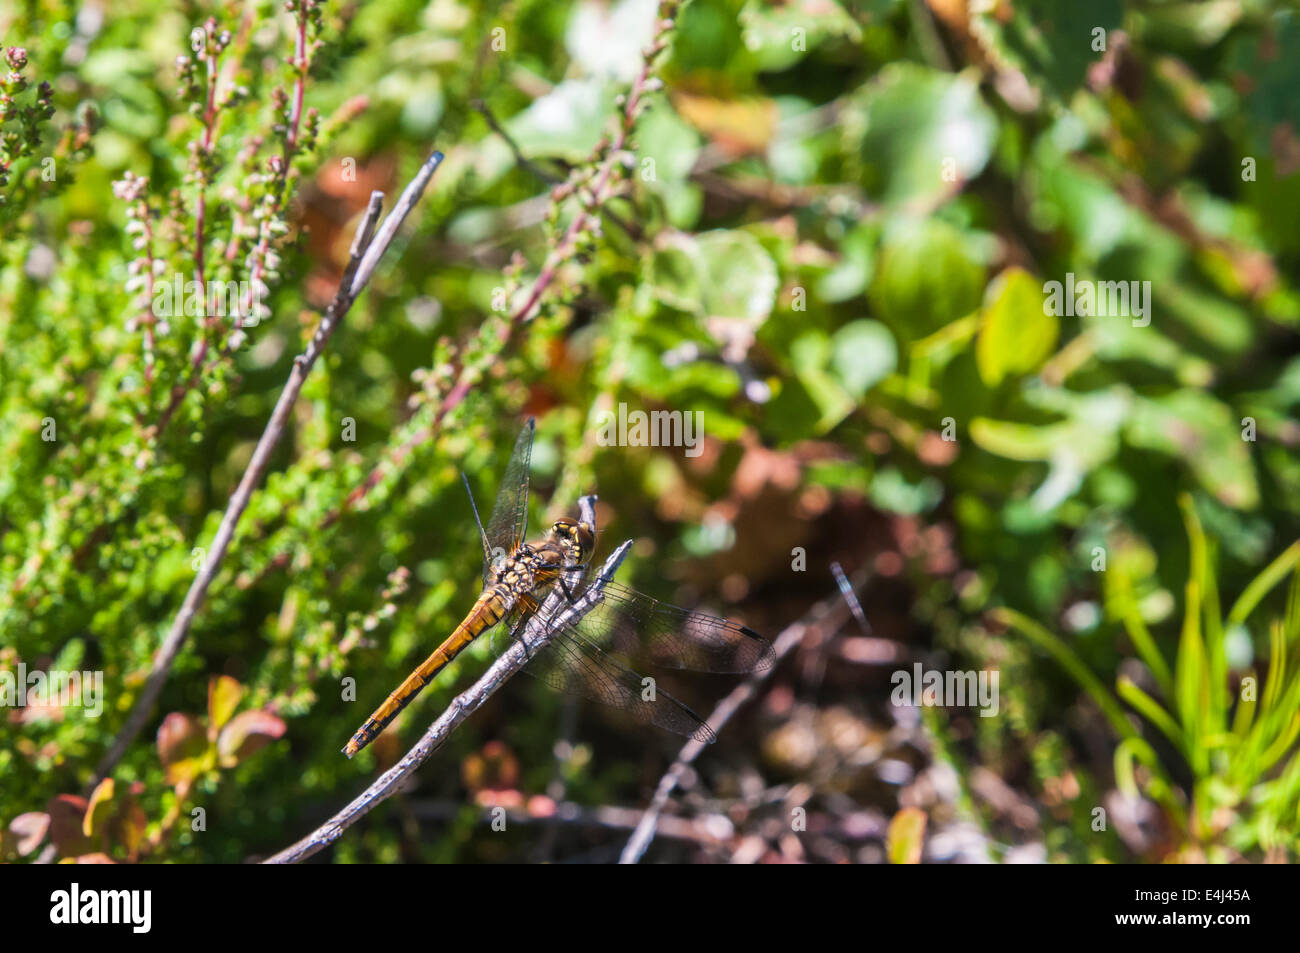 An Immature male Black Darter, Sympetrum danae at rest on a twig. Stock Photo